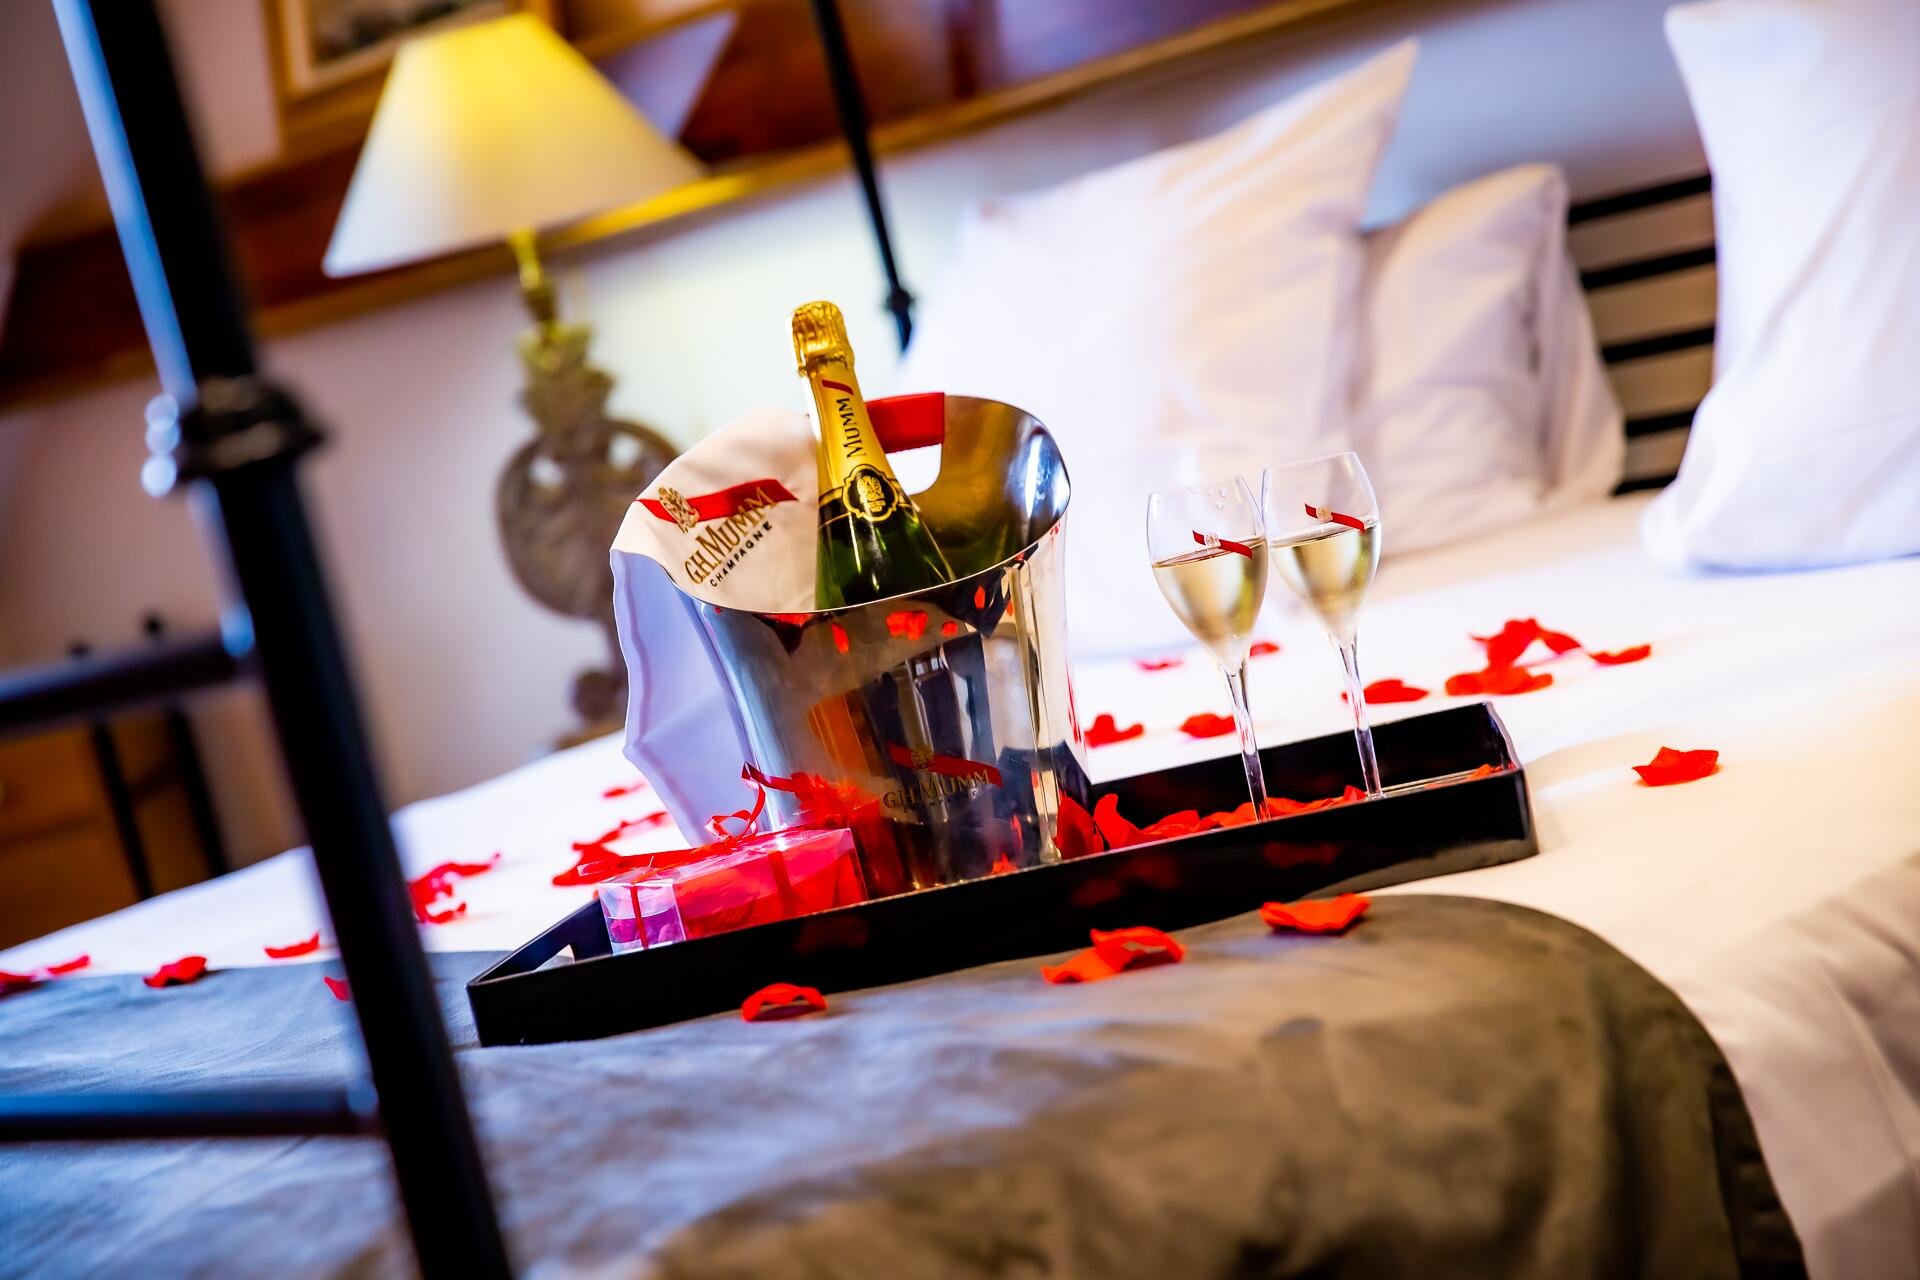 Glamor offer with champagne and rose petals